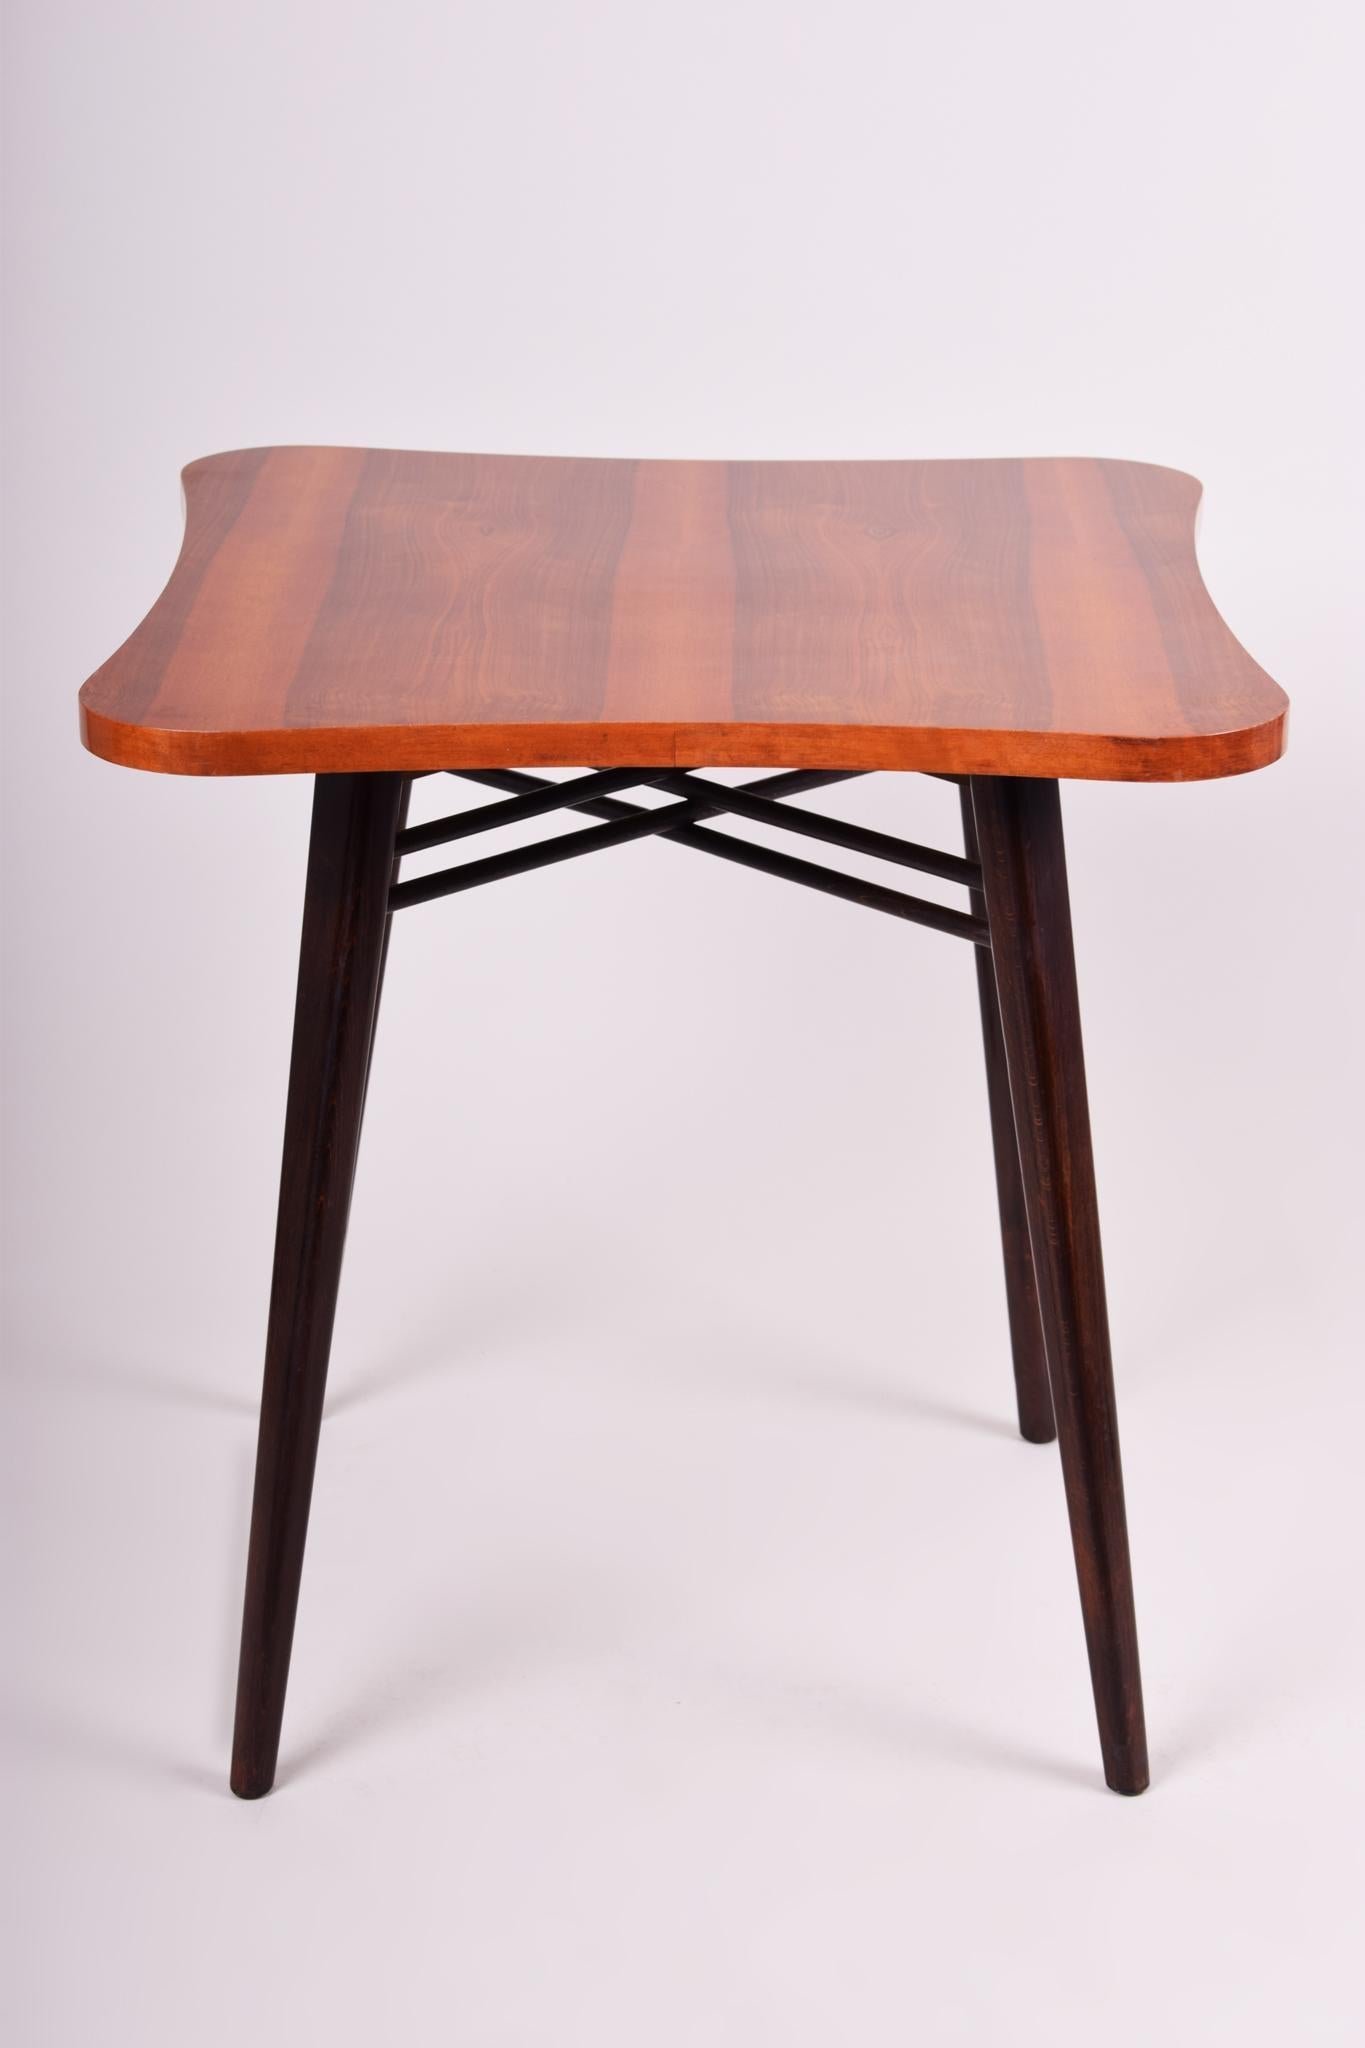 Small table.
Czech midcentury
Material: Walnut
Period: 1940-19649.
Condition: restored.